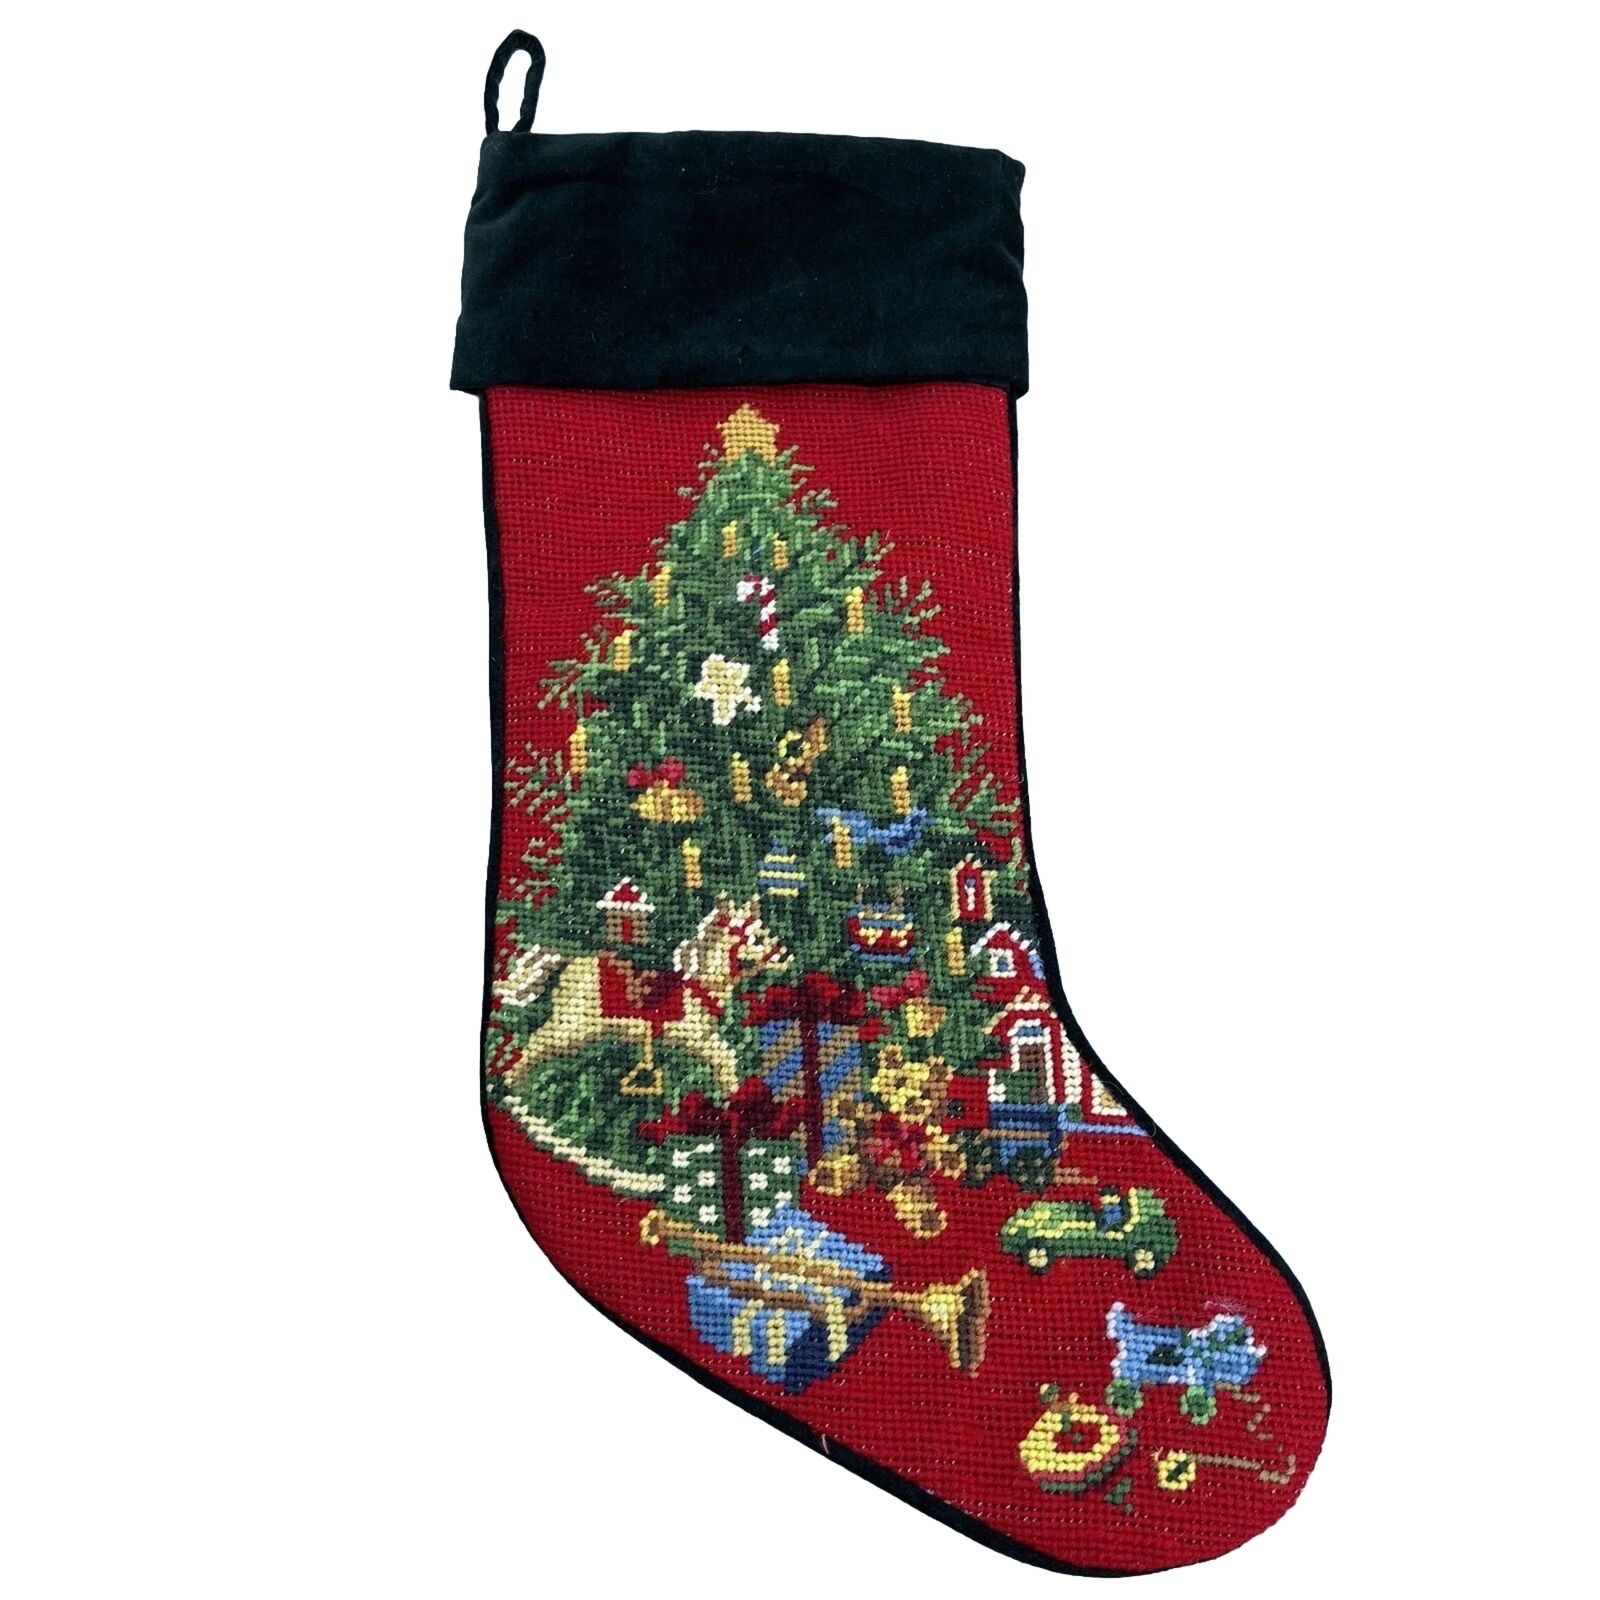 Needlepoint Christmas Stocking Christmas Tree With Gifts & Toys 20”